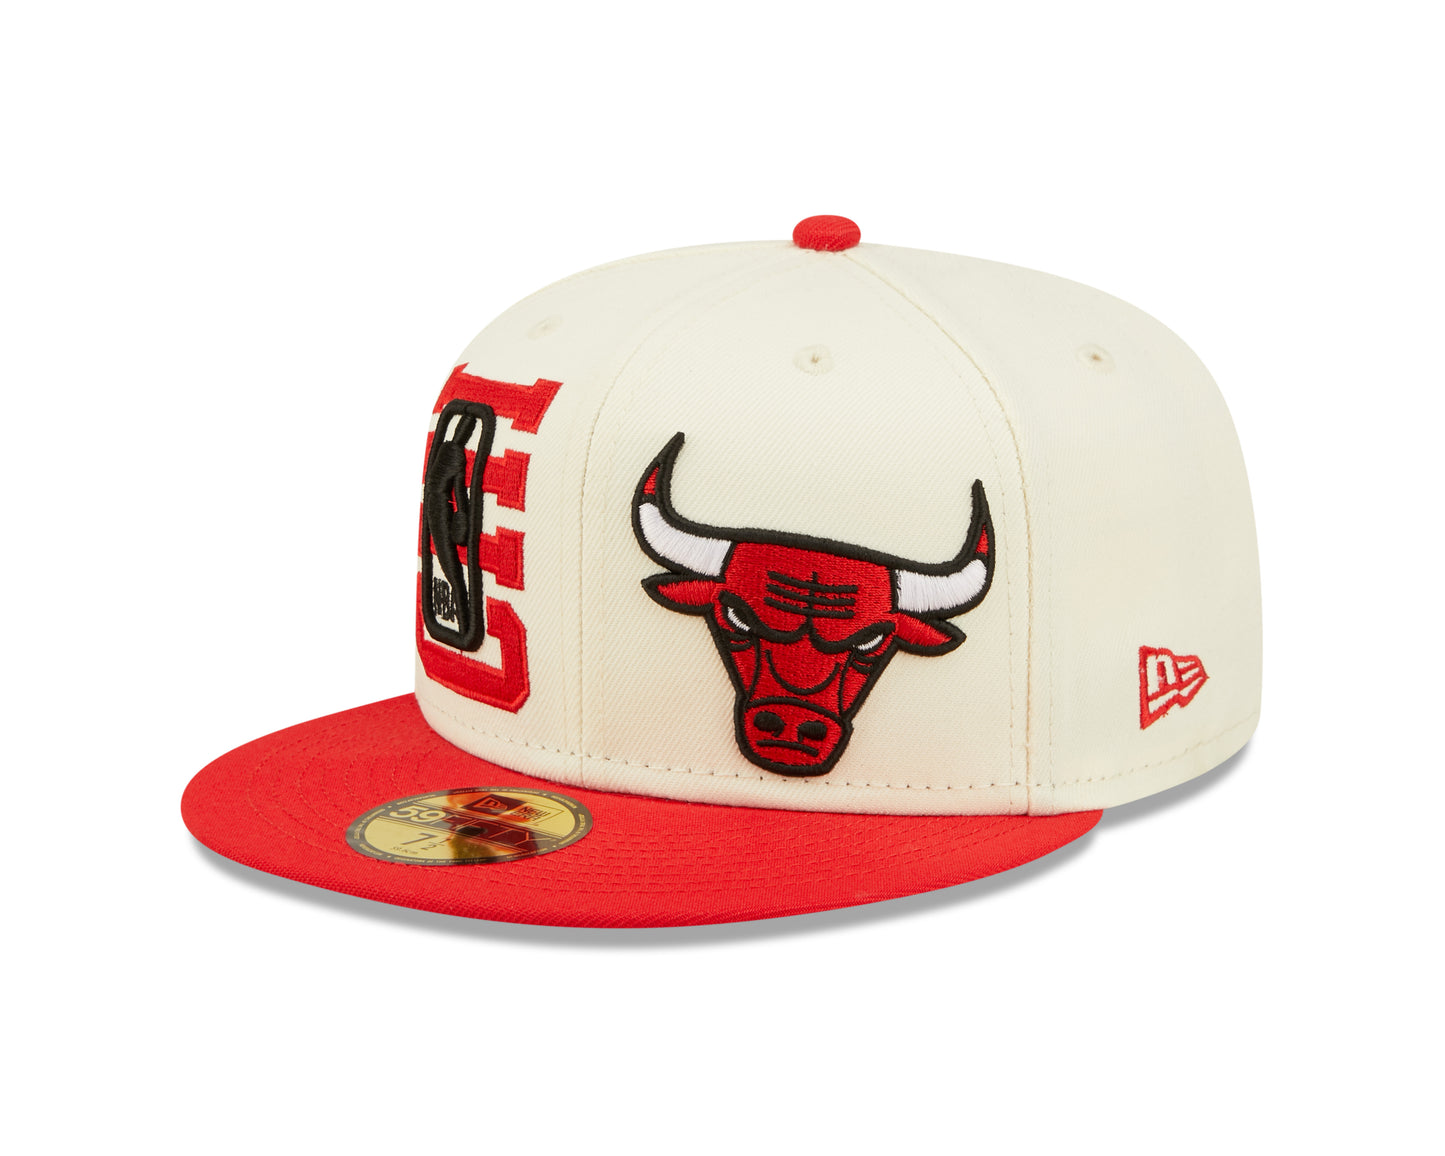 Chicago Bulls New Era NBA On Stage Draft 59fifty Fitted Hat- Cream